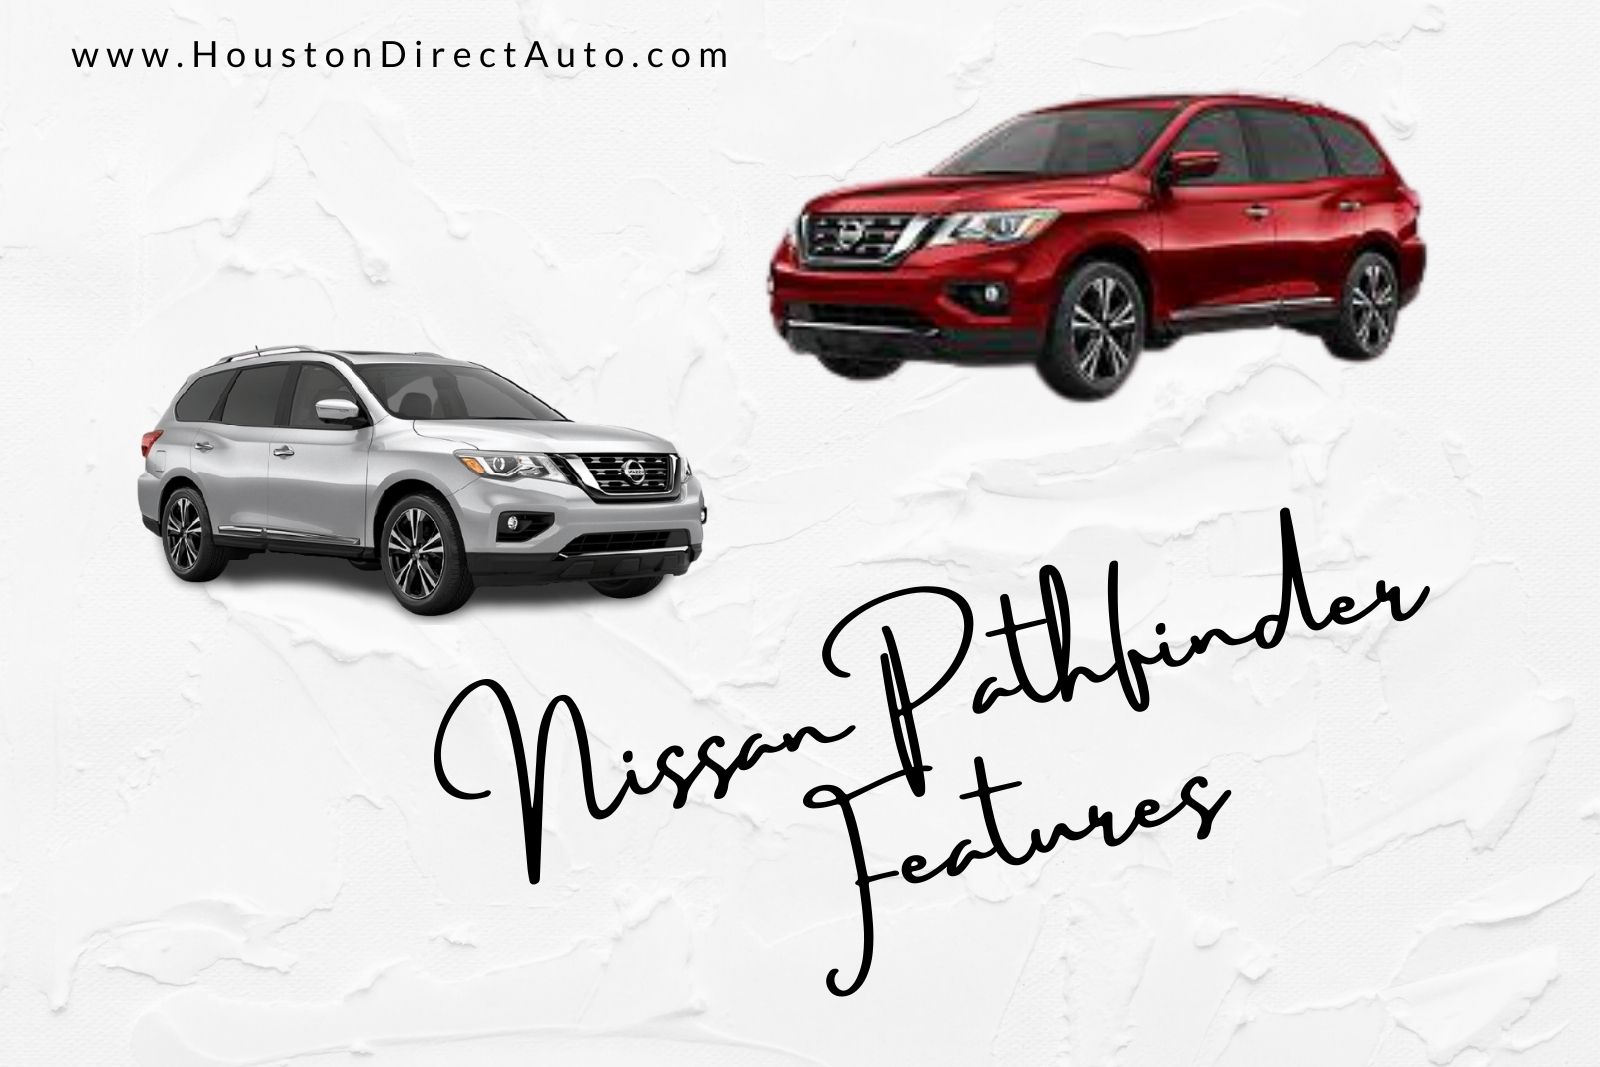 What Makes The Nissan Pathfinder - Used Nissan For Sale A Great Option For Families?